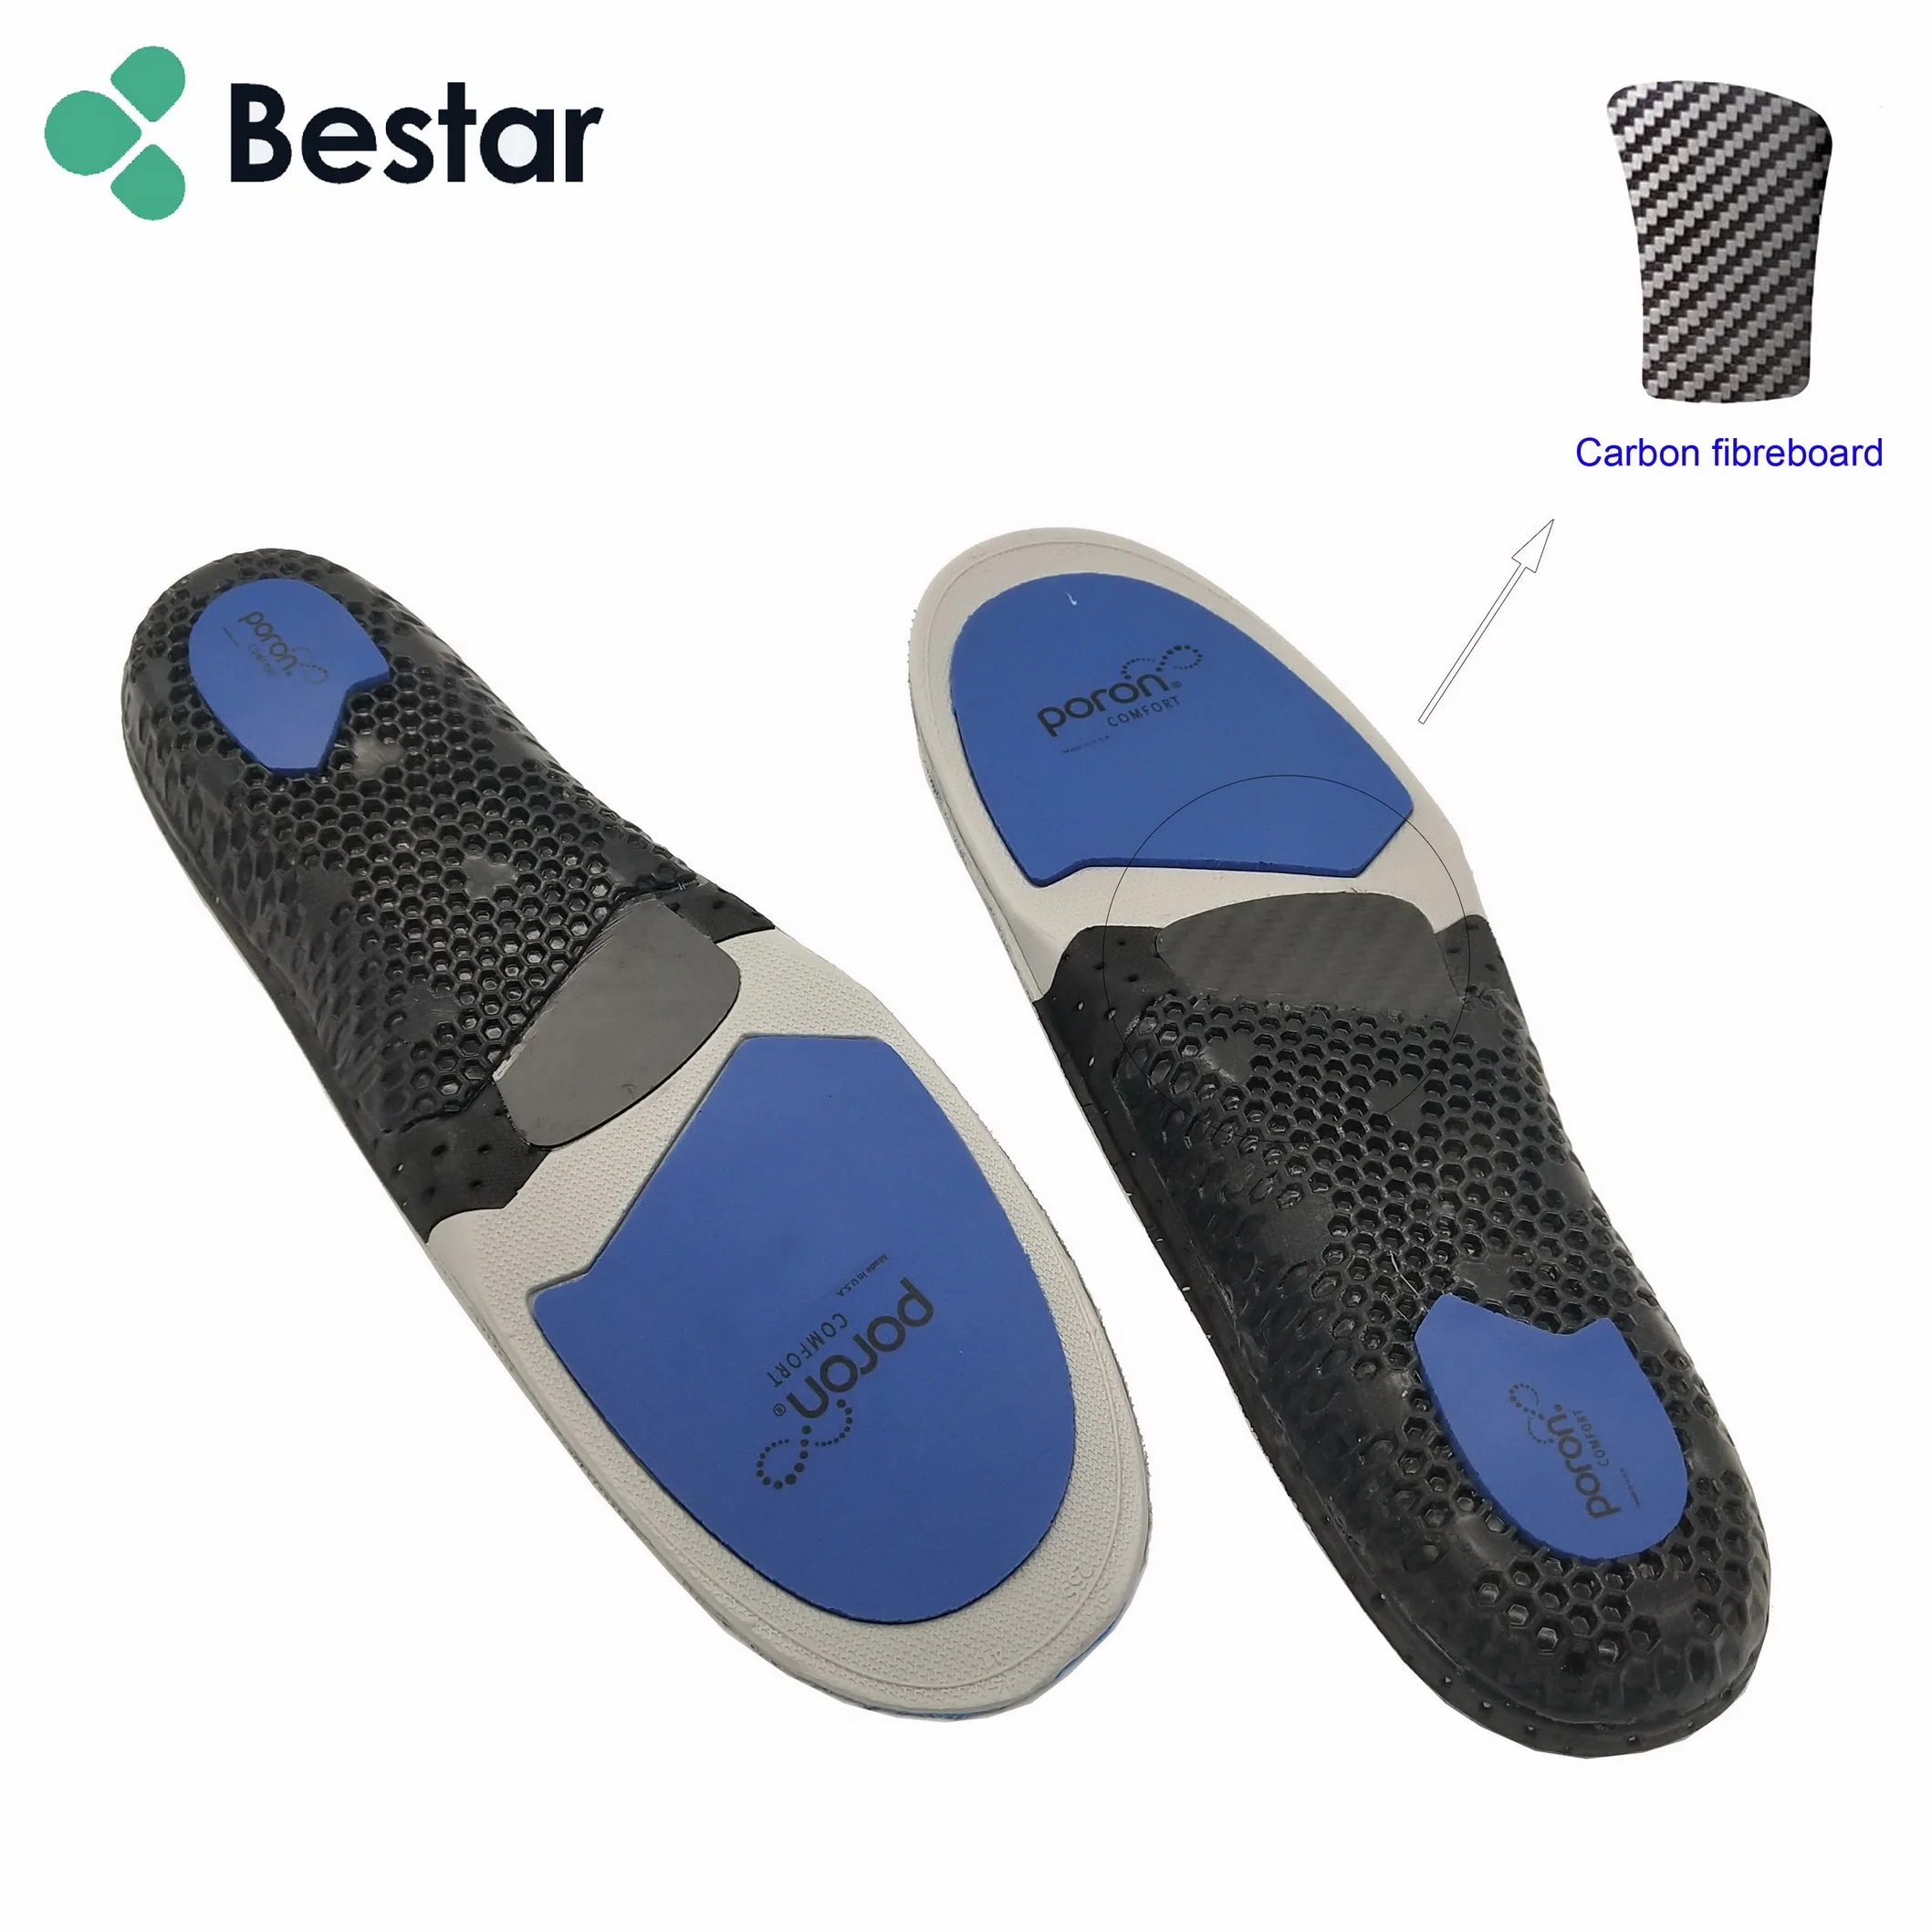 

Rigid Carbon Fiber Insole Flat Foot Arch Support Shoe Insoles For Plantar Fasciitis Poron Gel Insoles, As photo or customized